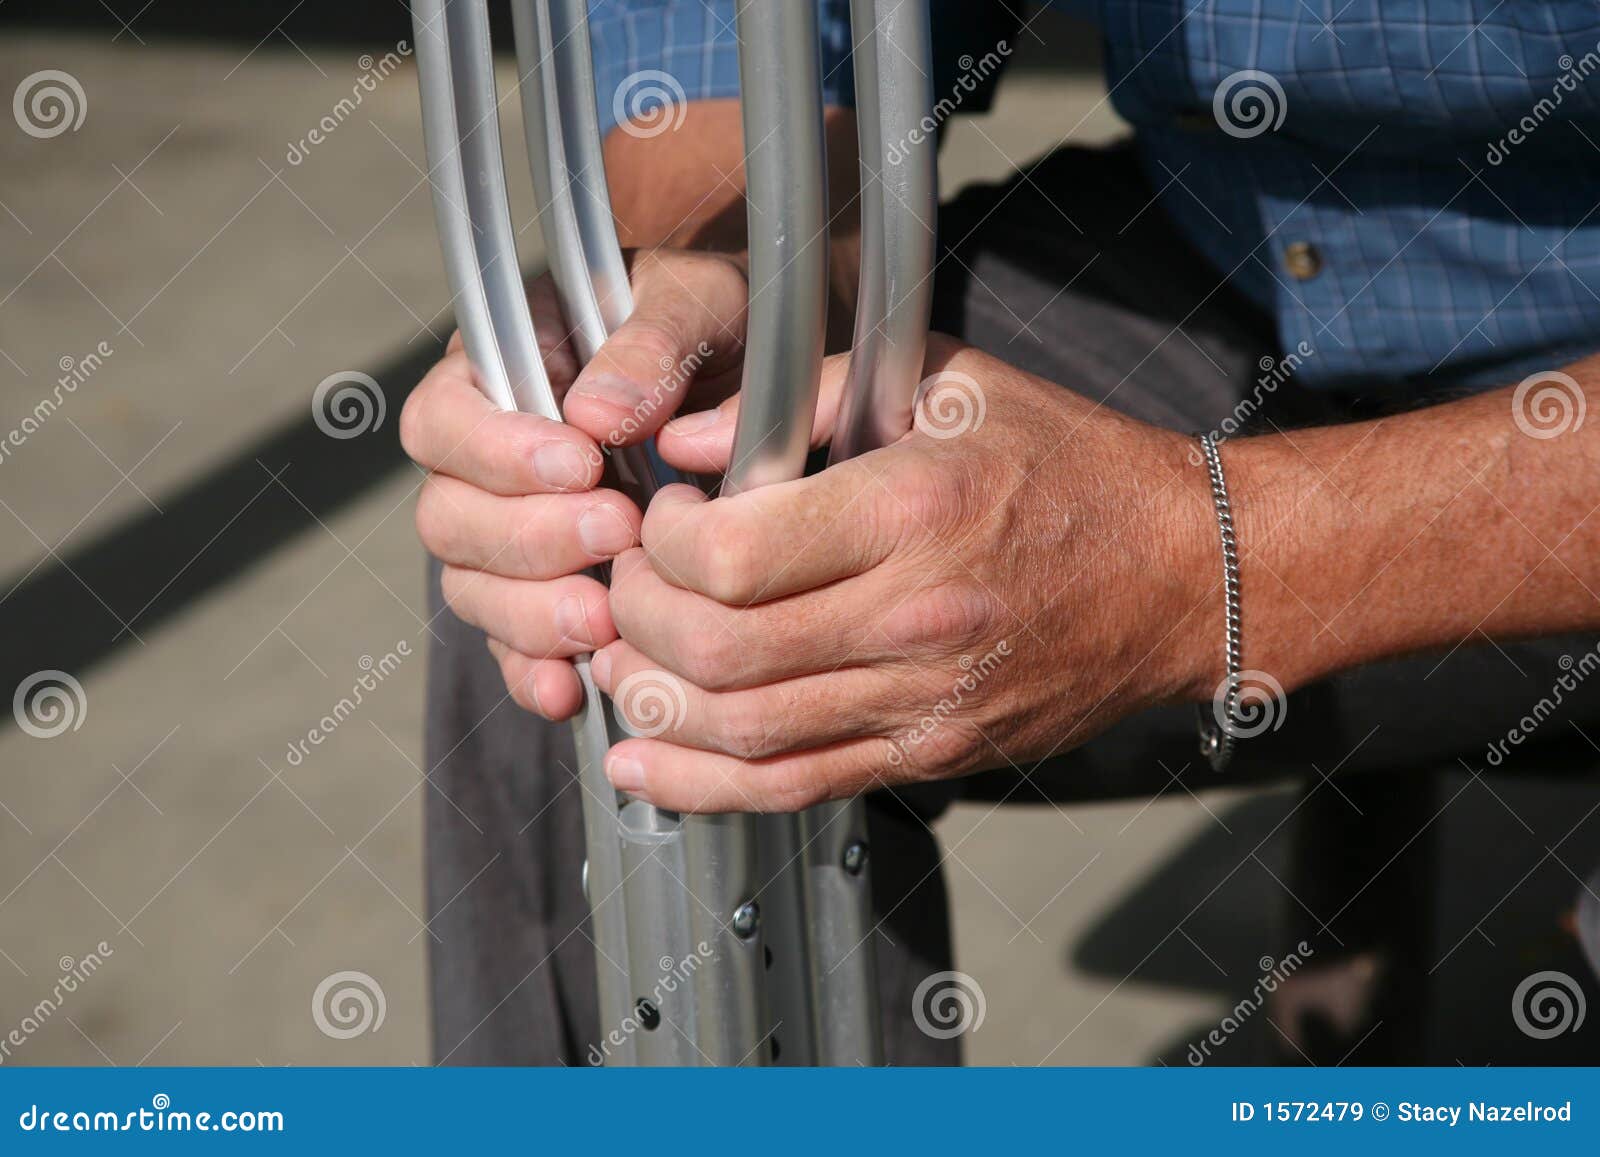 hands holding crutches